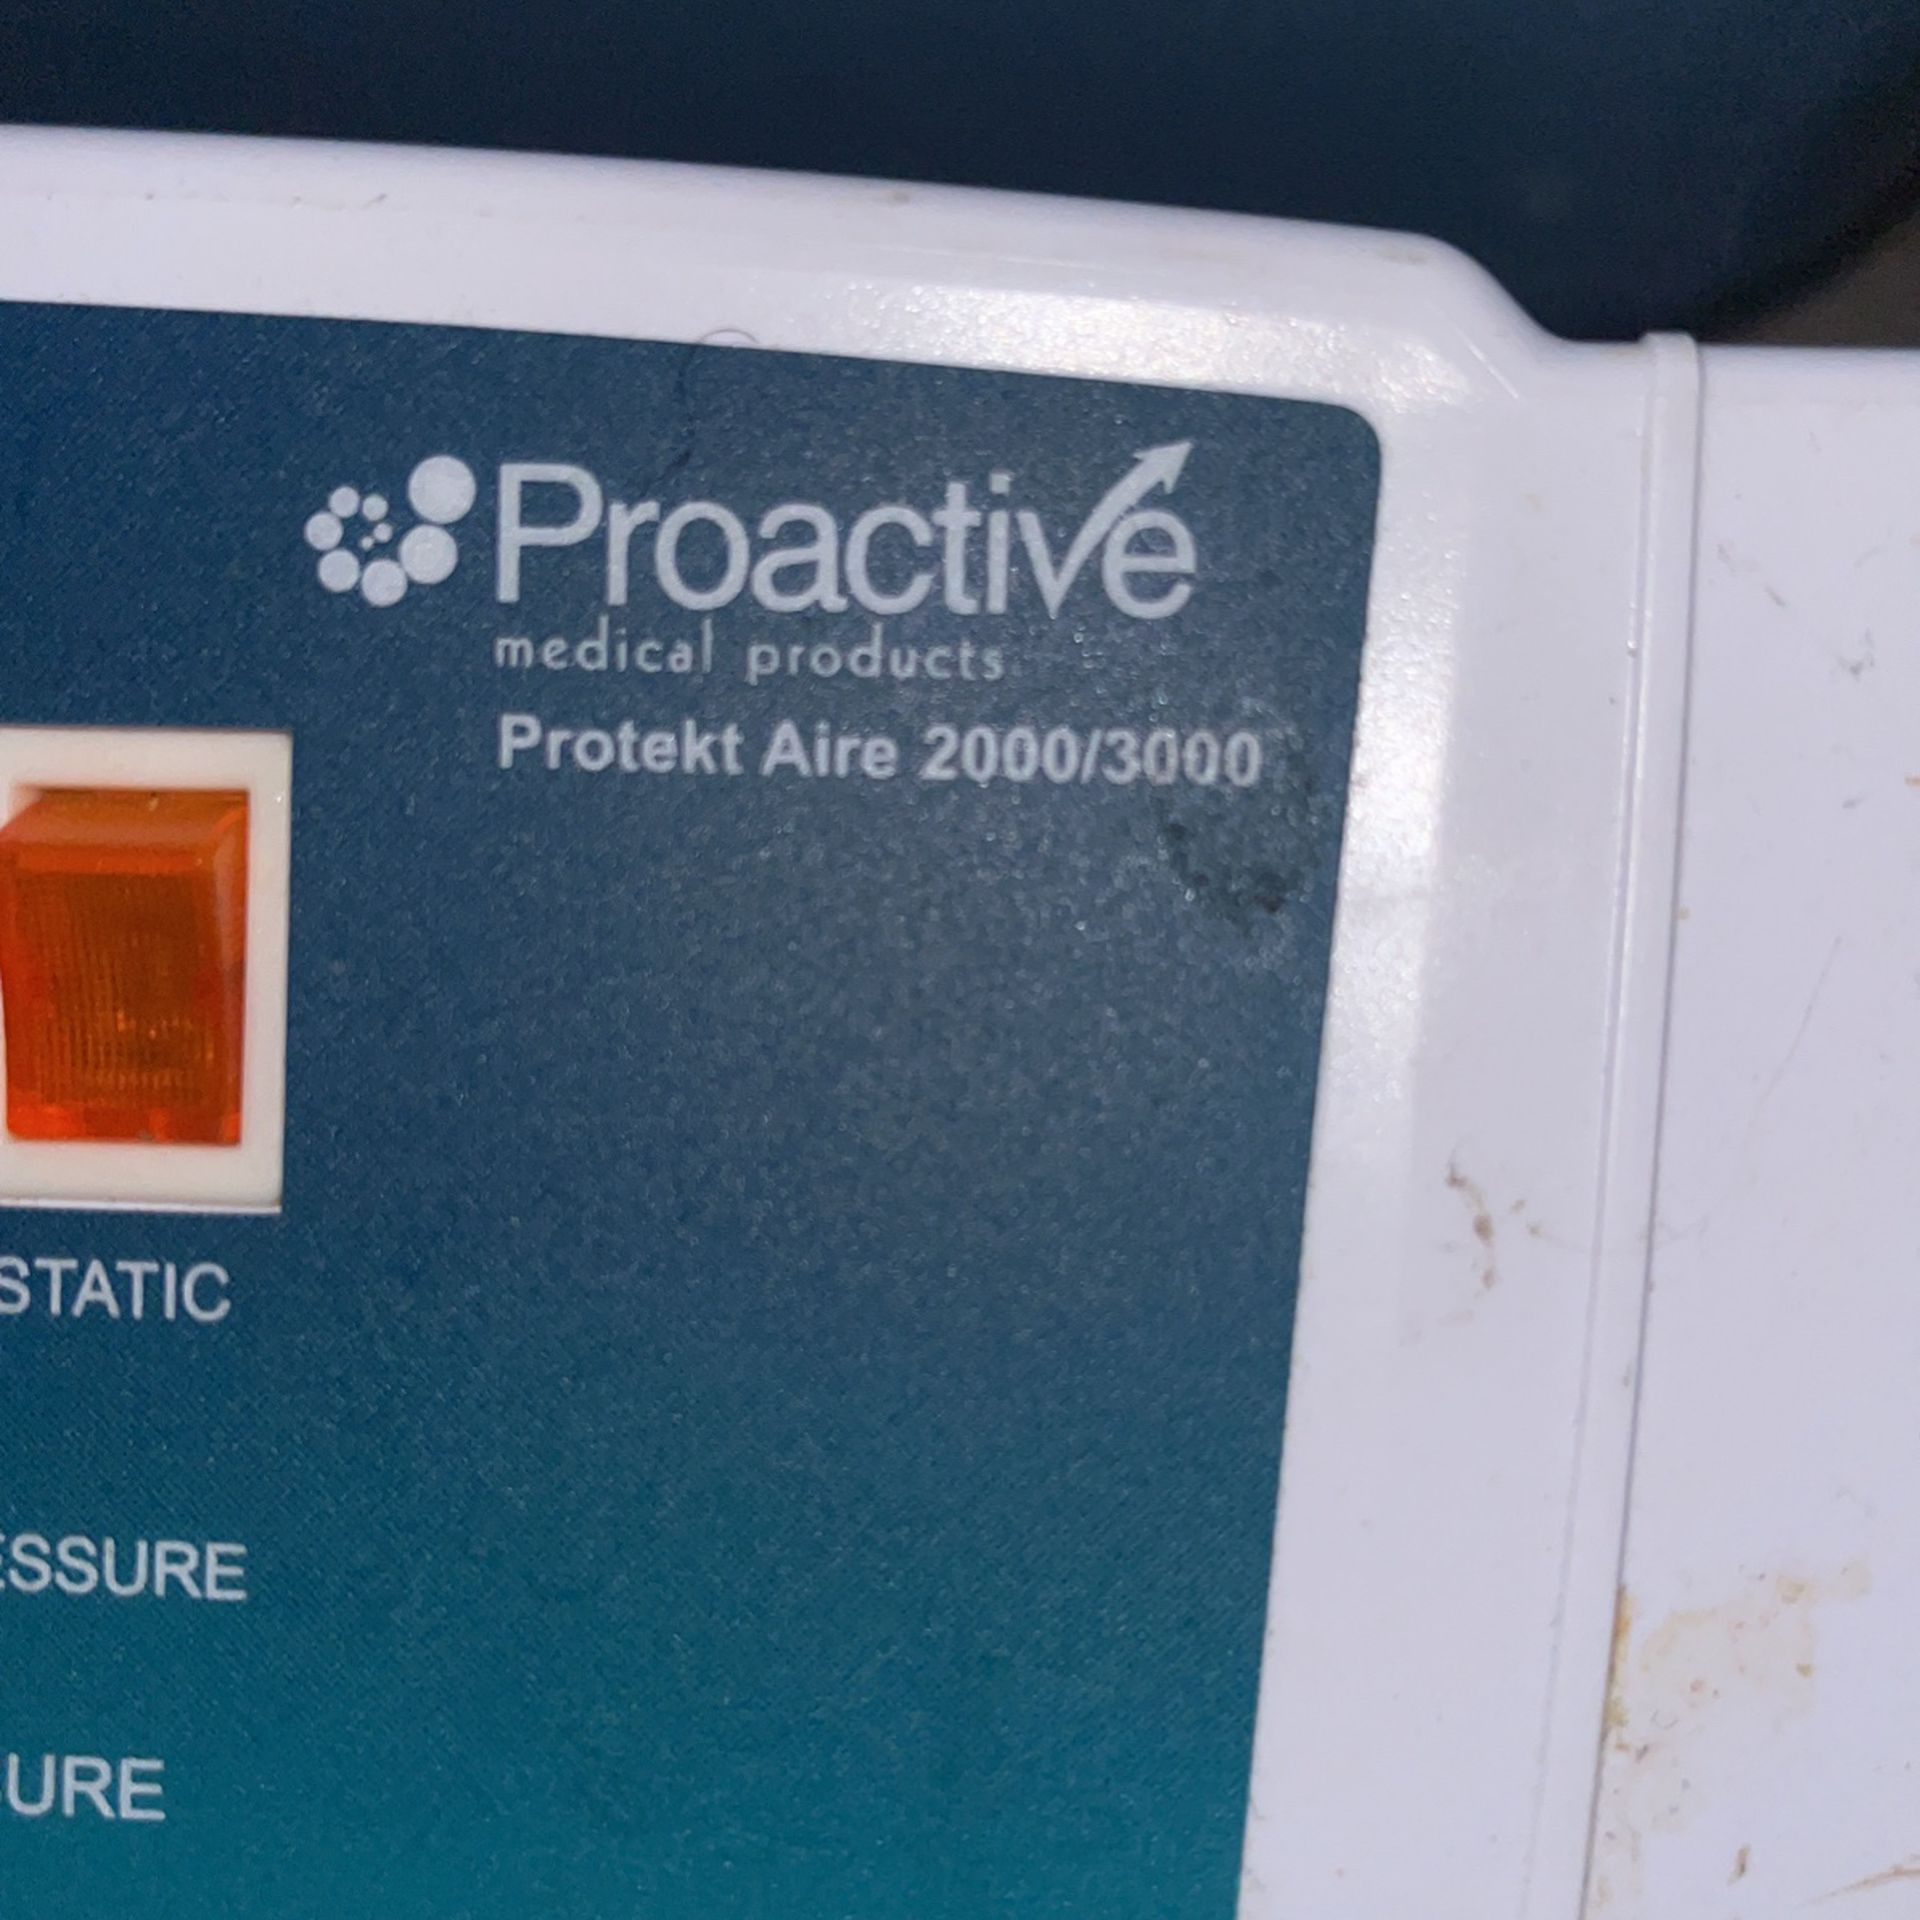 Proactive Protekt Aire 2000/3000